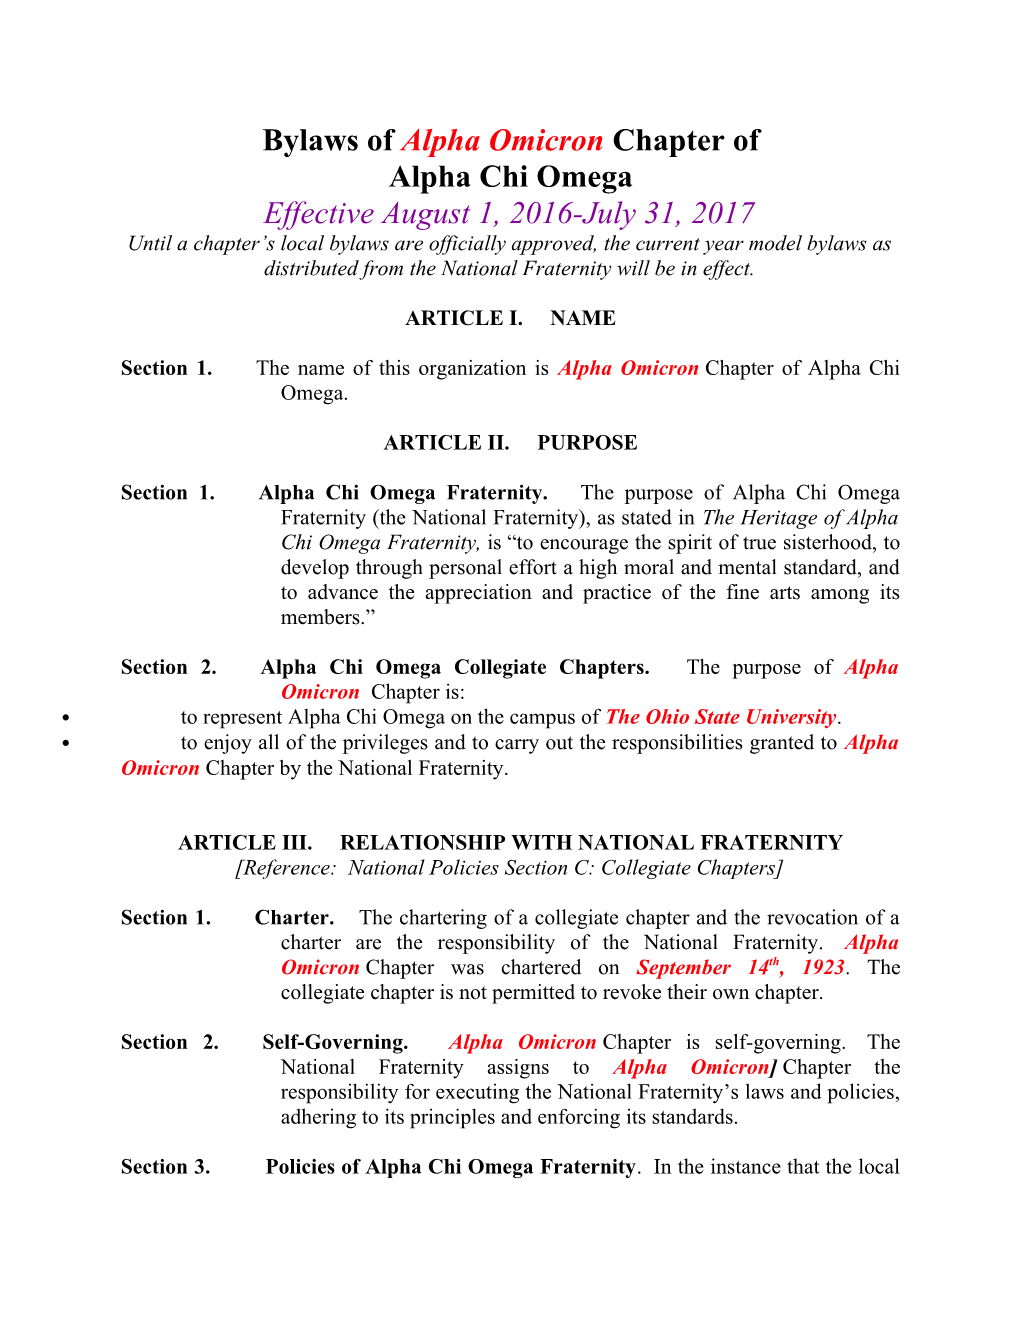 Bylaws of Alpha Omicronchapter Of